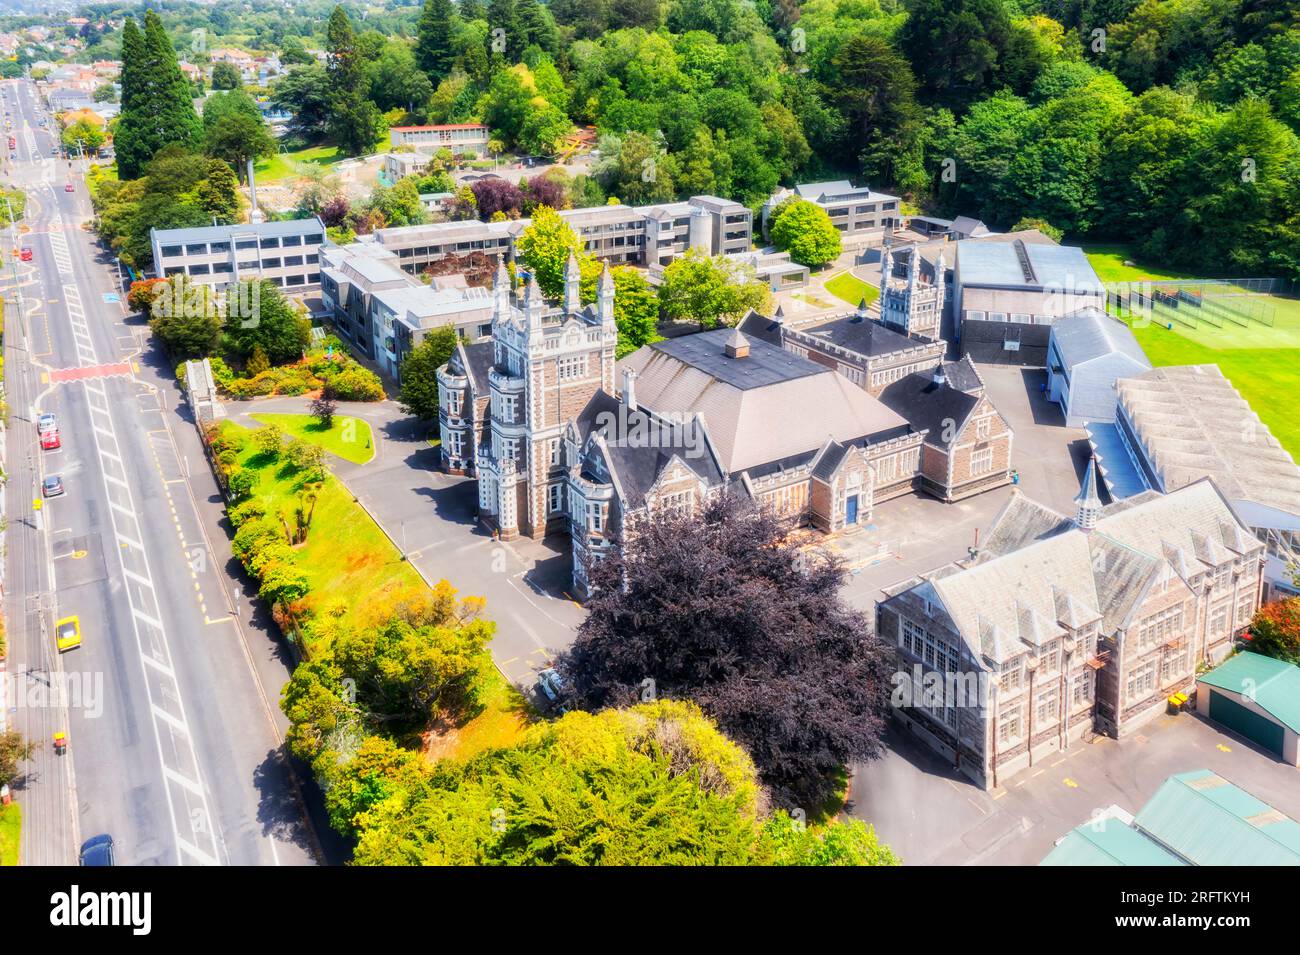 Otago high school in Dunedin city of New Zealand - aerial view of public education campus. Stock Photo